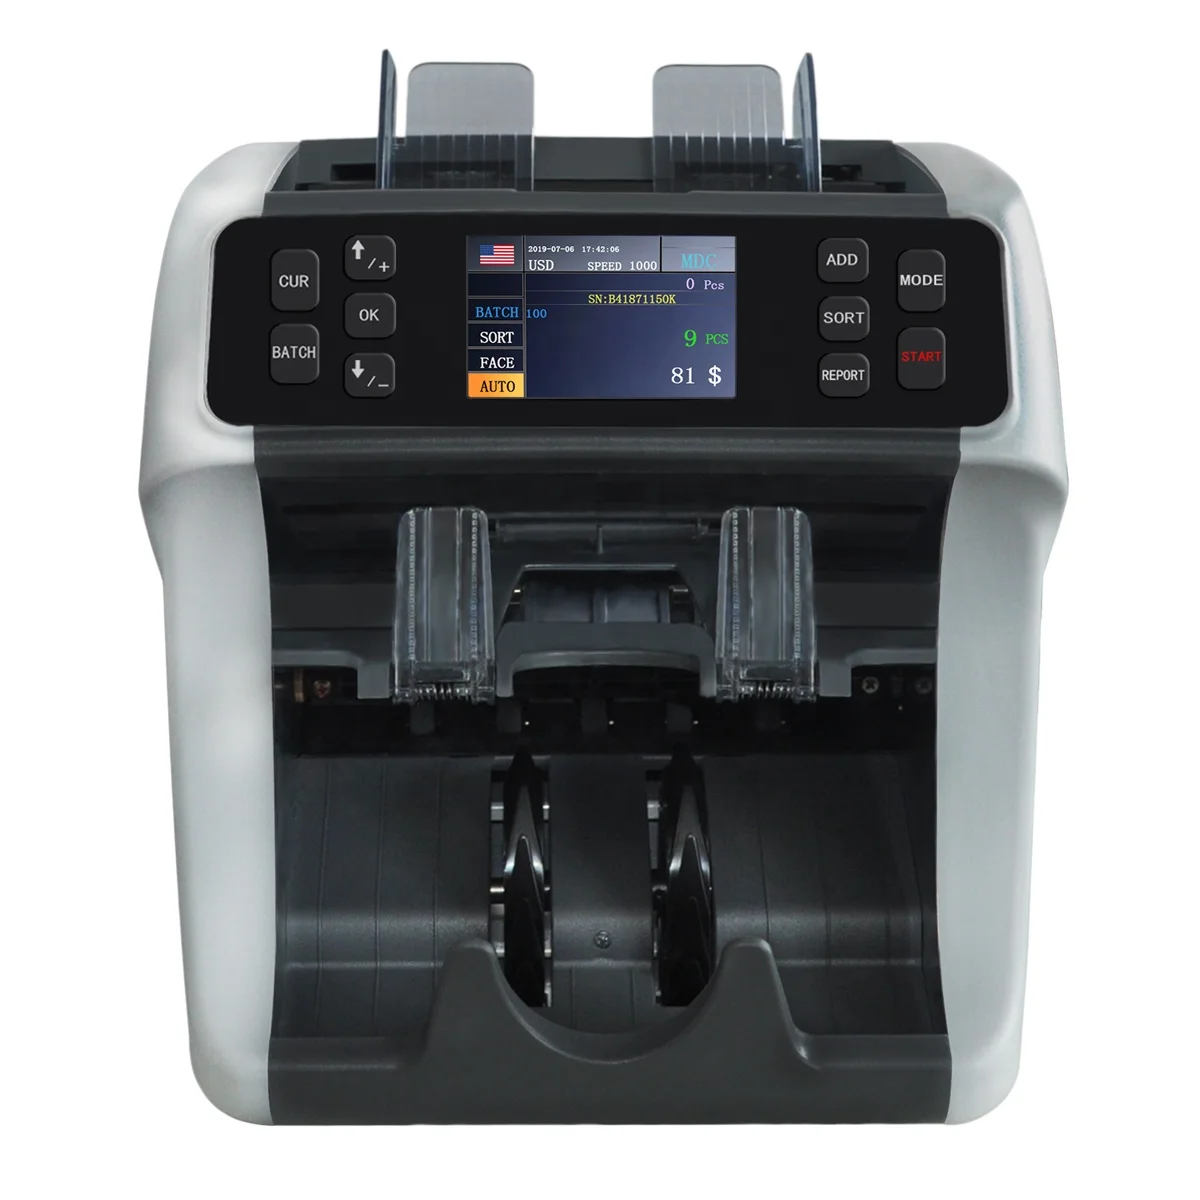 USD, CAD,COP,MXN,BRL TWO pocket CIS value cash currency counter money paper counting machine